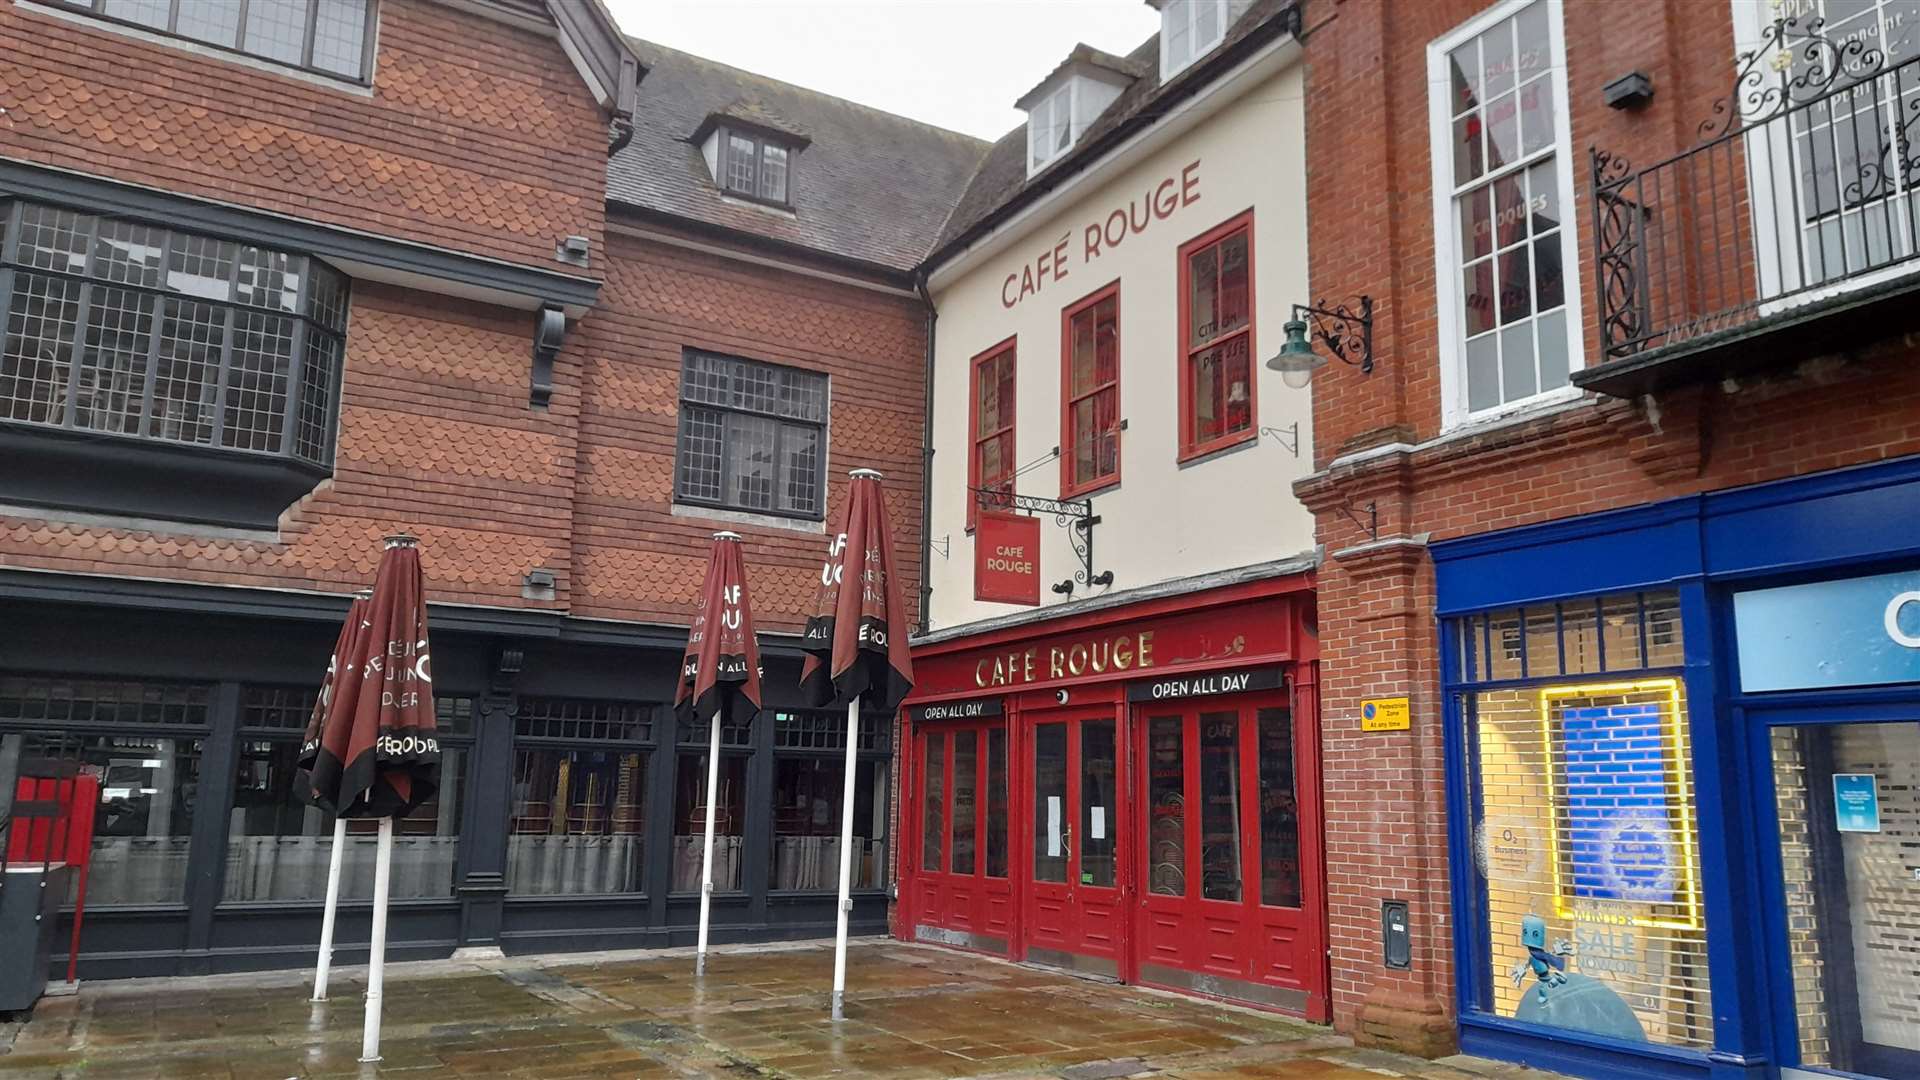 Cafe Rouge has closed down and is now up to be let